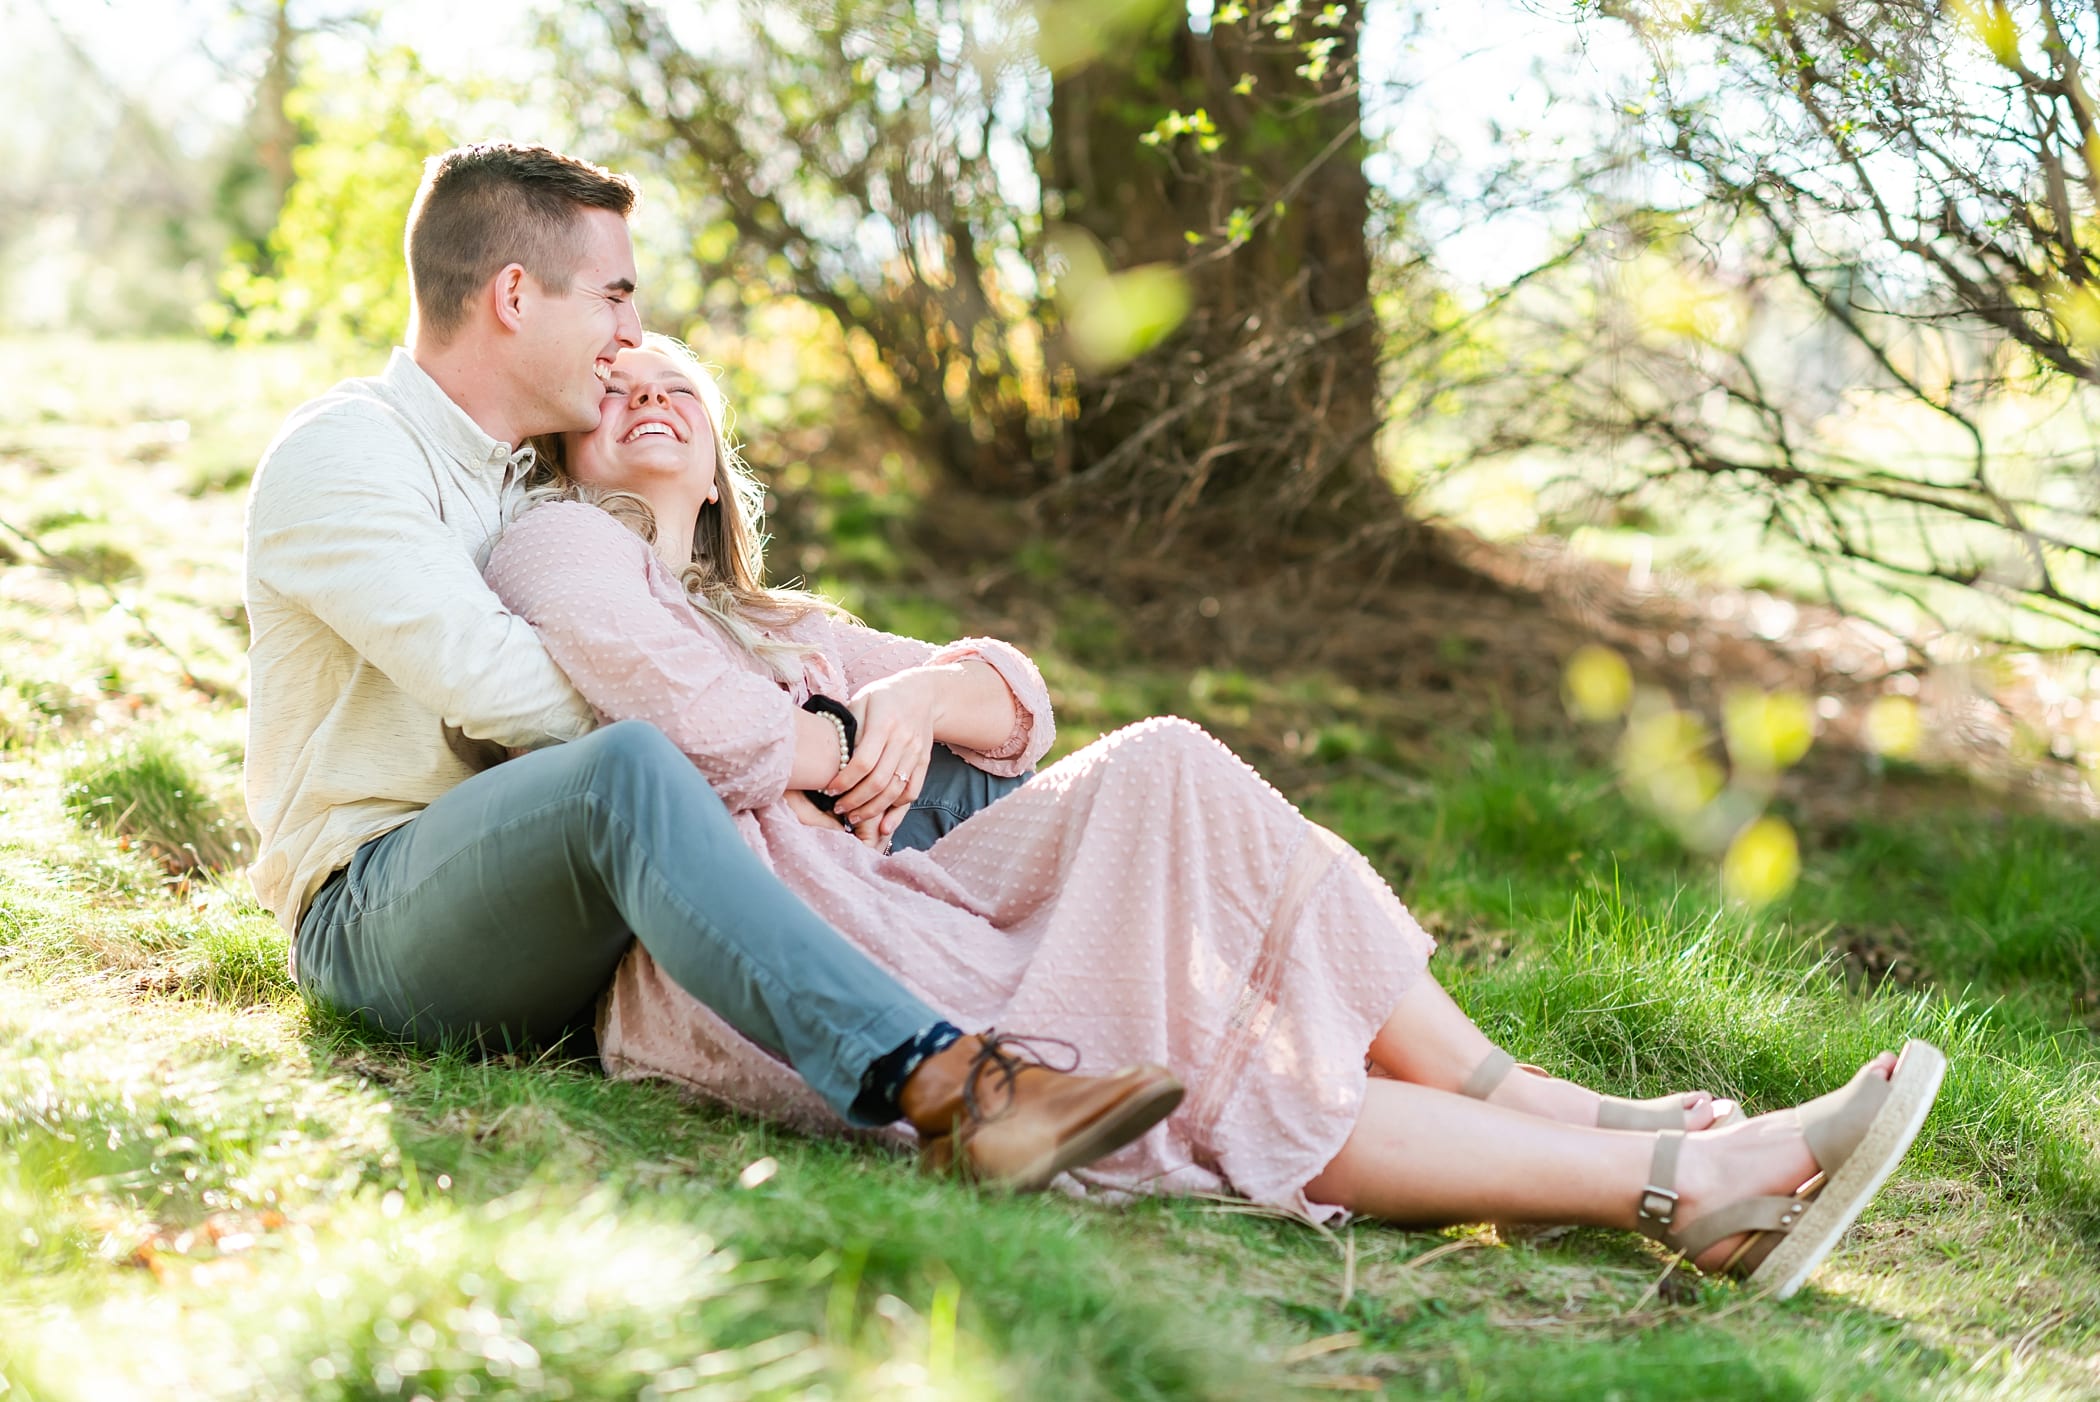 Sitting down engagement photo with laughter from couple in Boise, Idaho